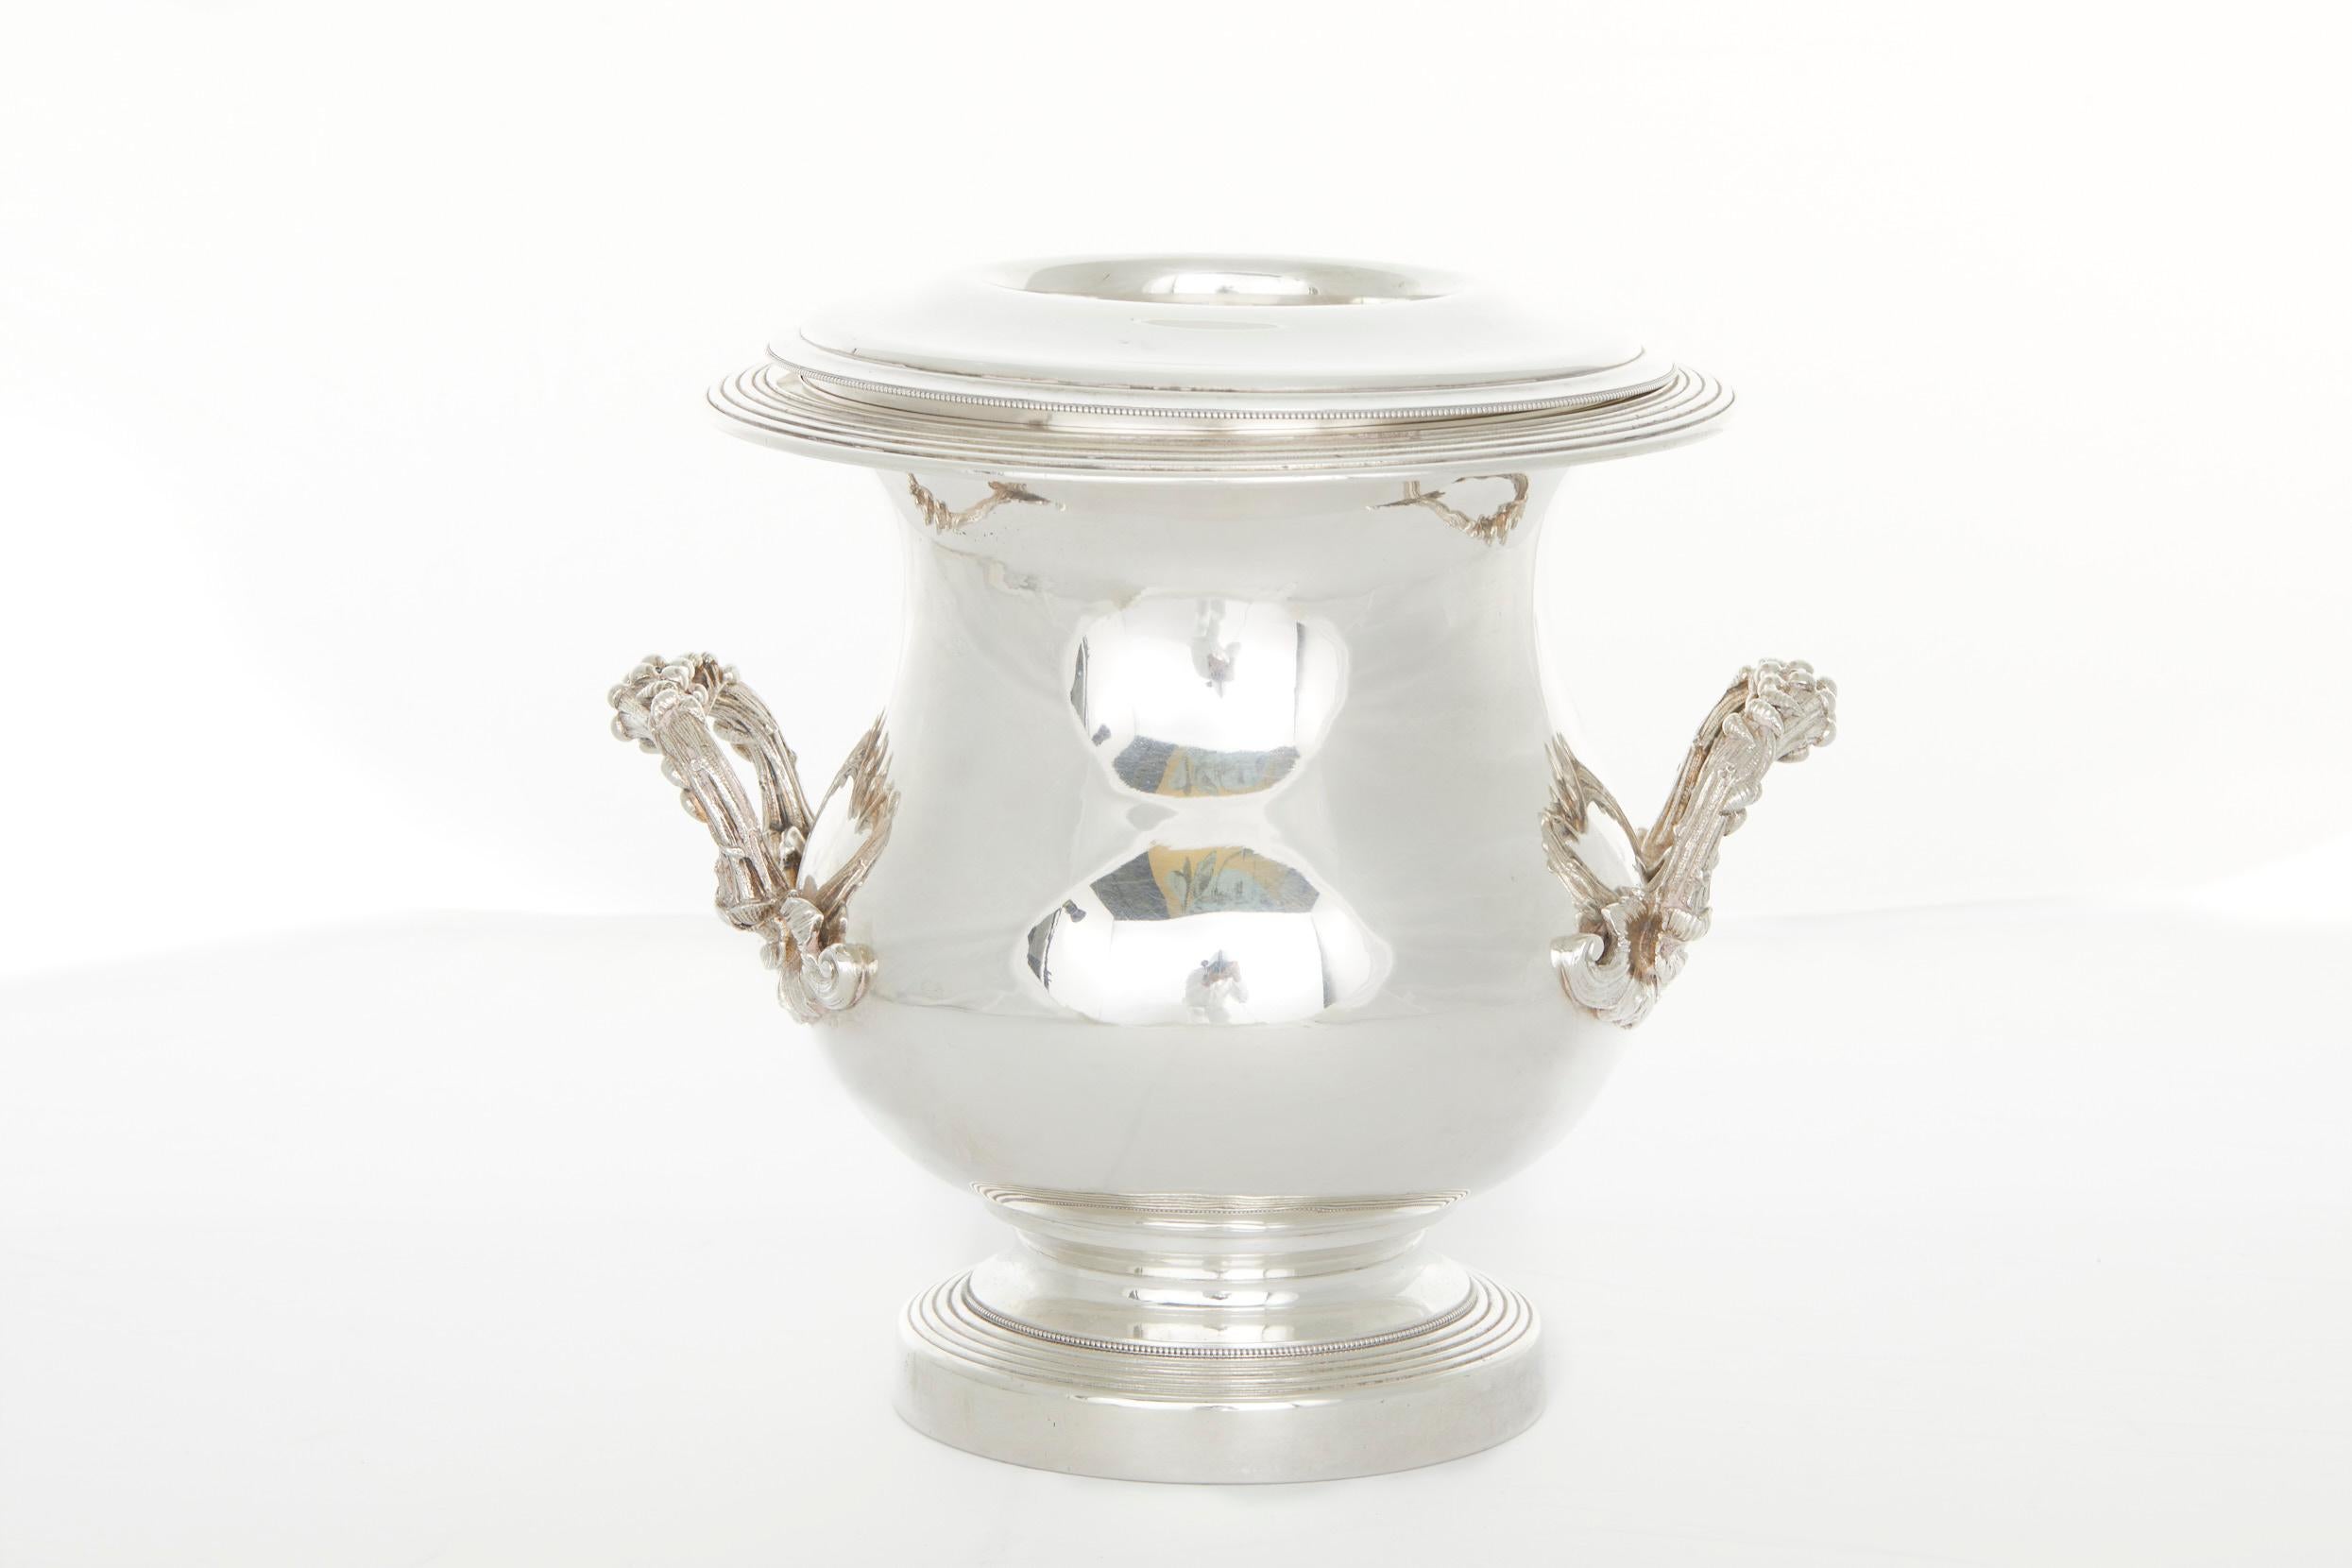 19th Century English Sheffield silver plated barware / tableware wine cooler / ice bucket with removable insert, exterior design details and two side handles. The wine cooler / ice bucket is in good antique condition with wear consistent with age /